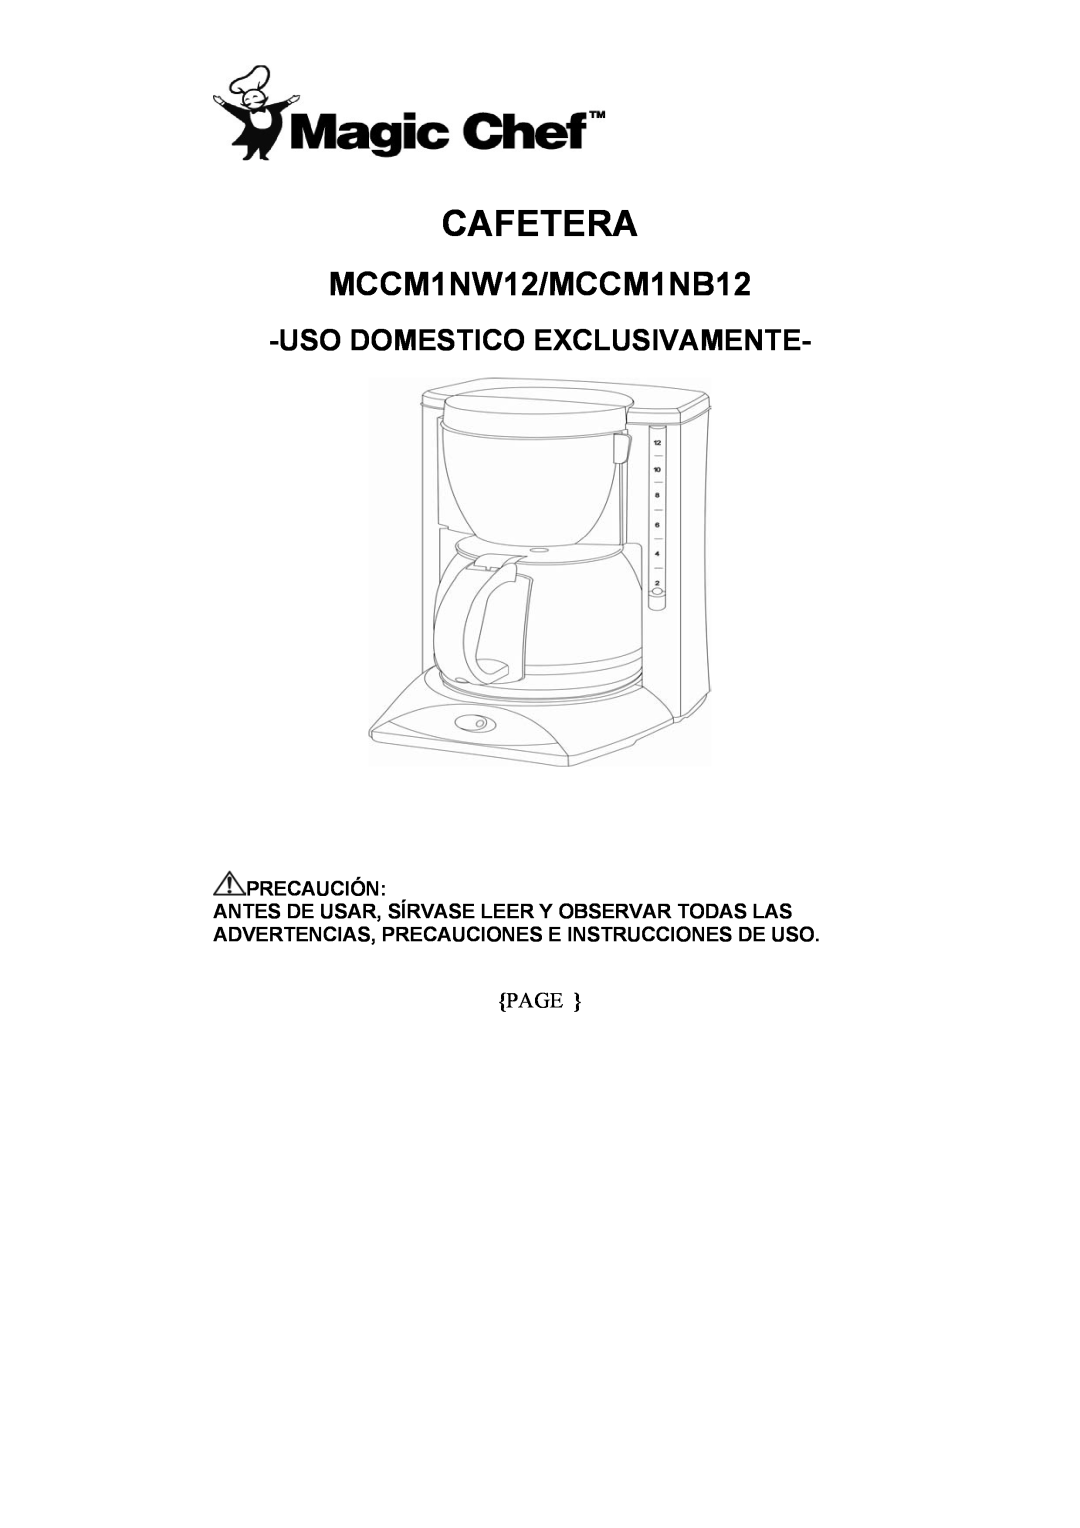 Maytag operating instructions Cafetera, Uso Domestico Exclusivamente, MCCM1NW12/MCCM1NB12, Page 